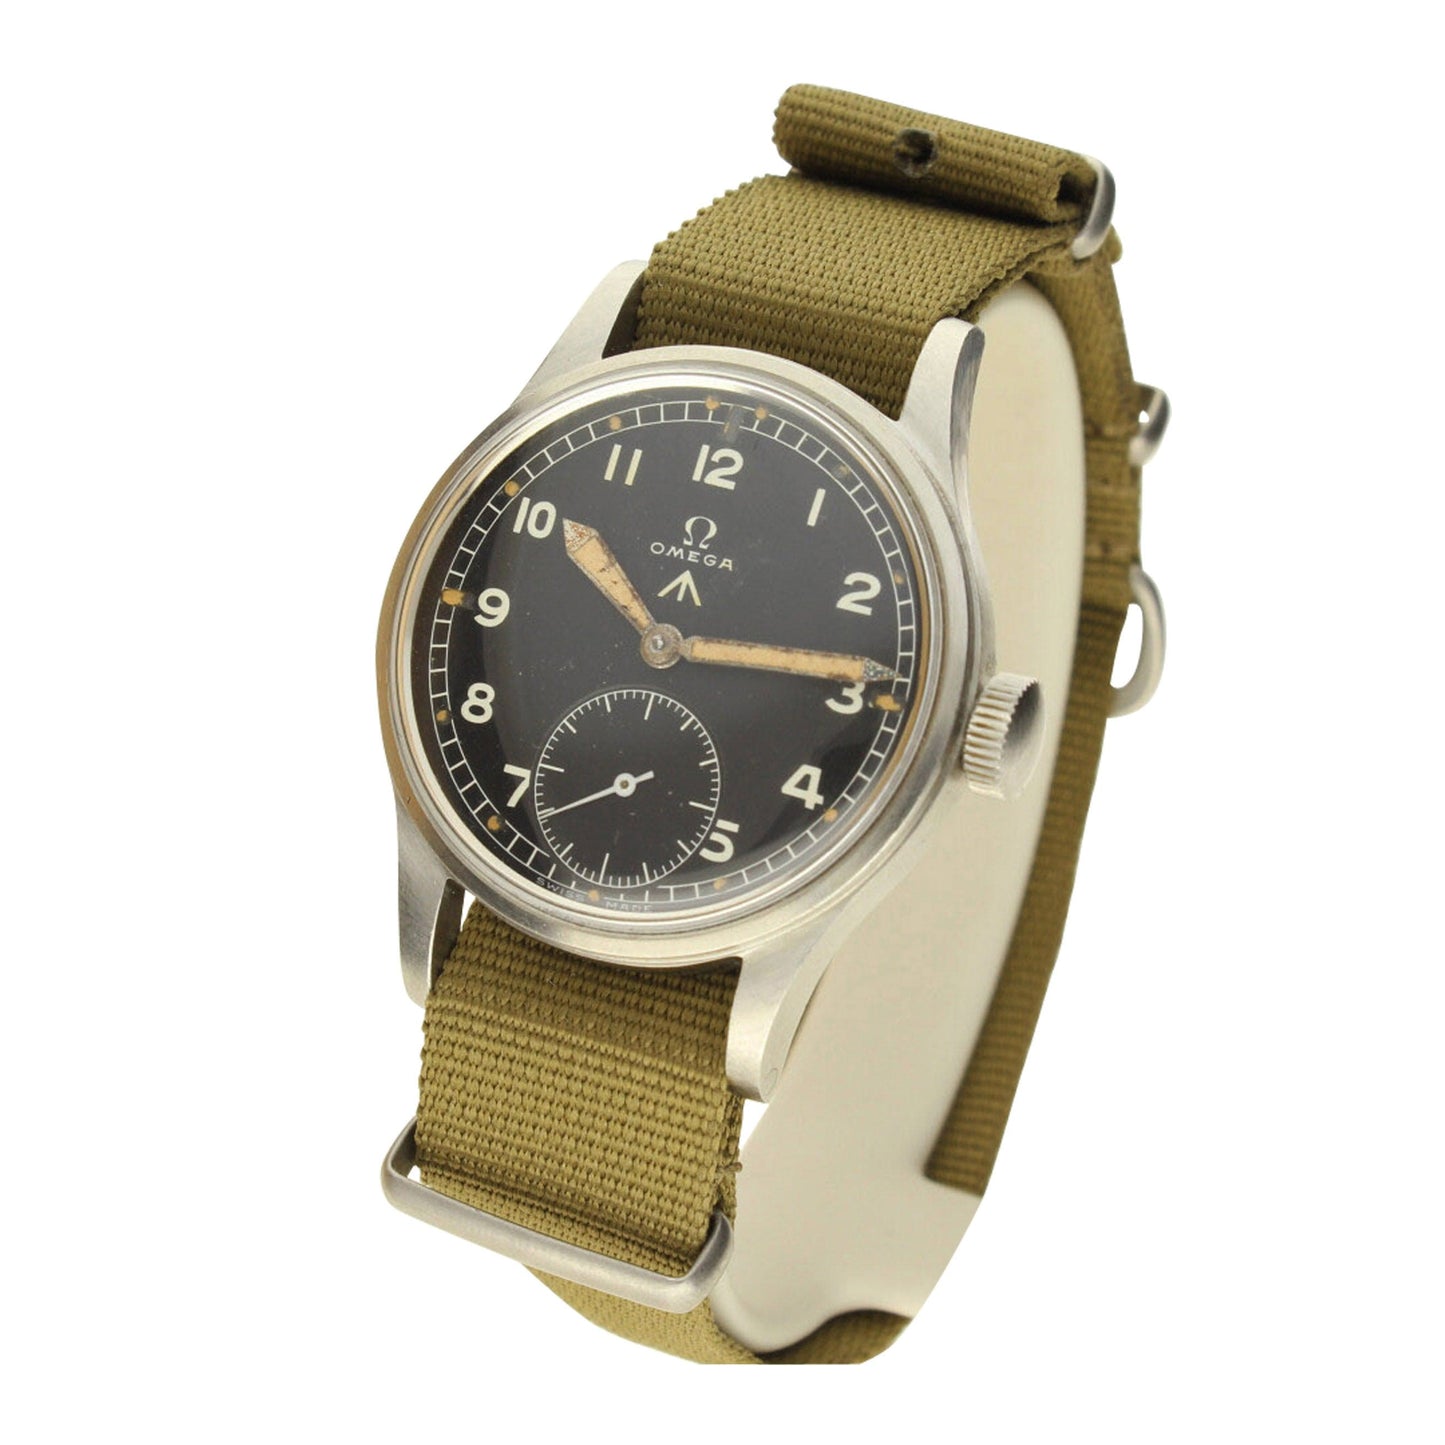 Stainless steel OMEGA British military watch, part of the "Dirty dozen". Made 1945